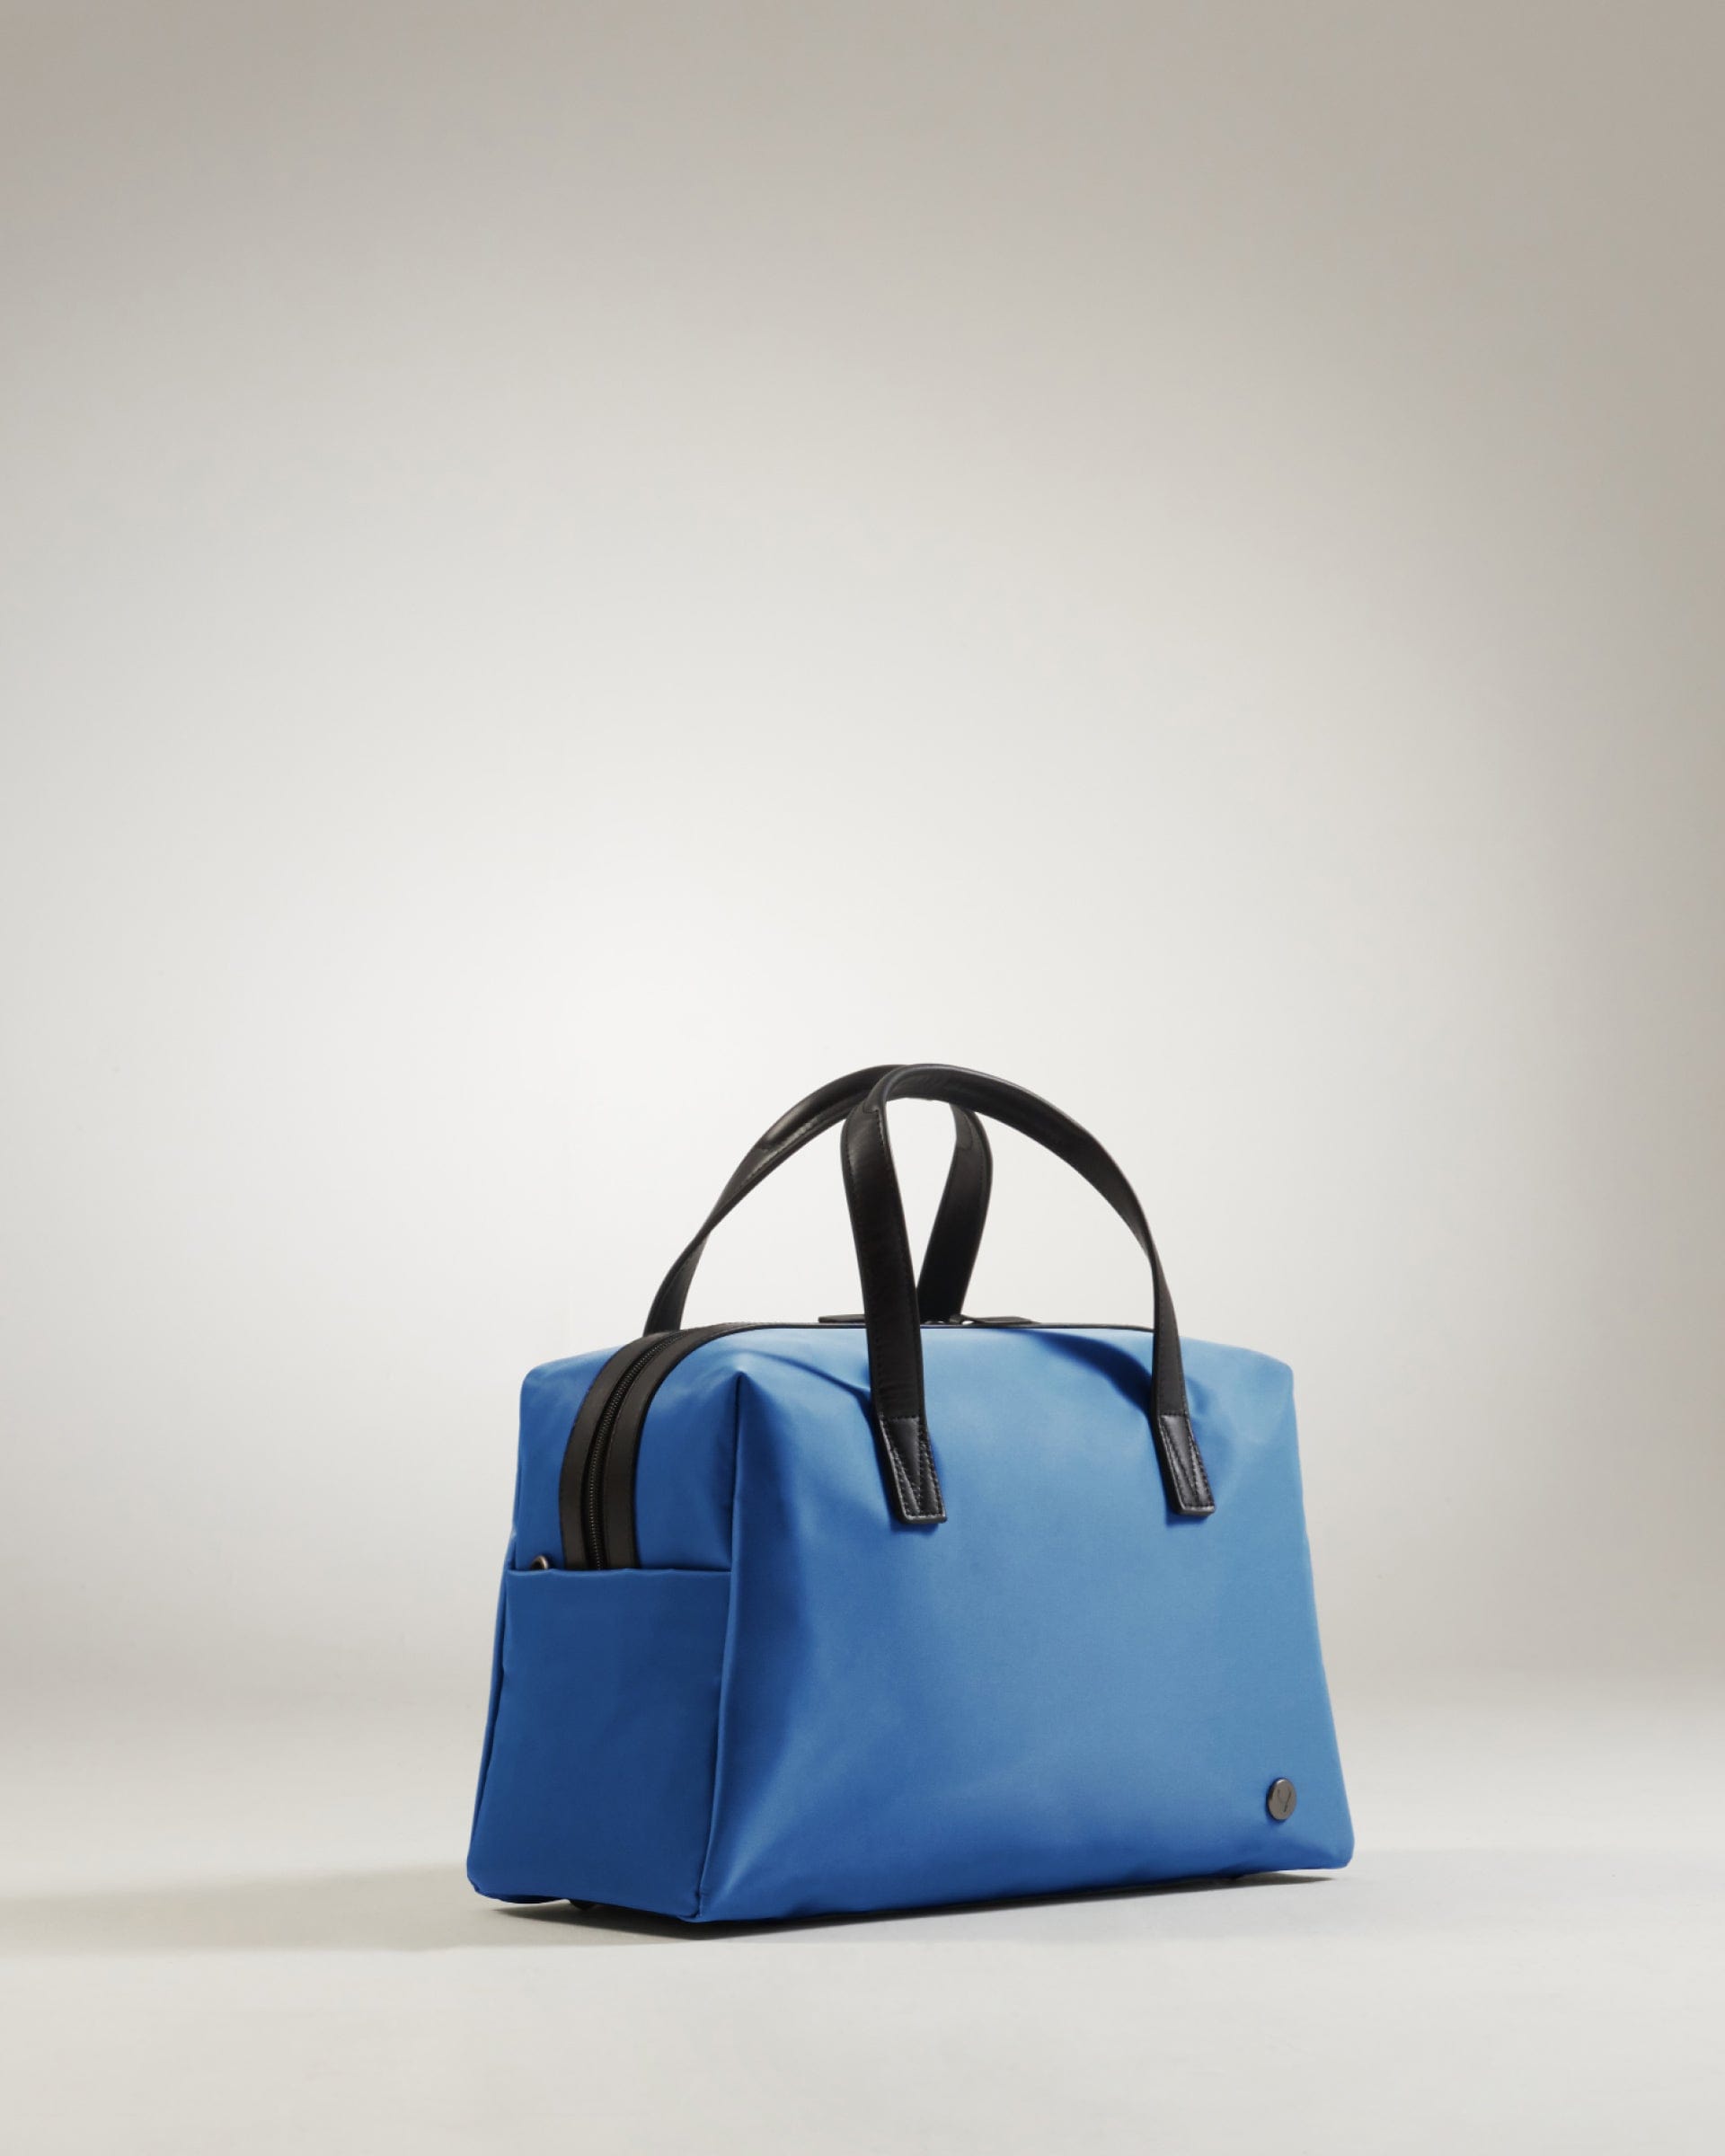 View Antler Chelsea Overnight Bag In Azure Size 415 x 26 x 18 cm information